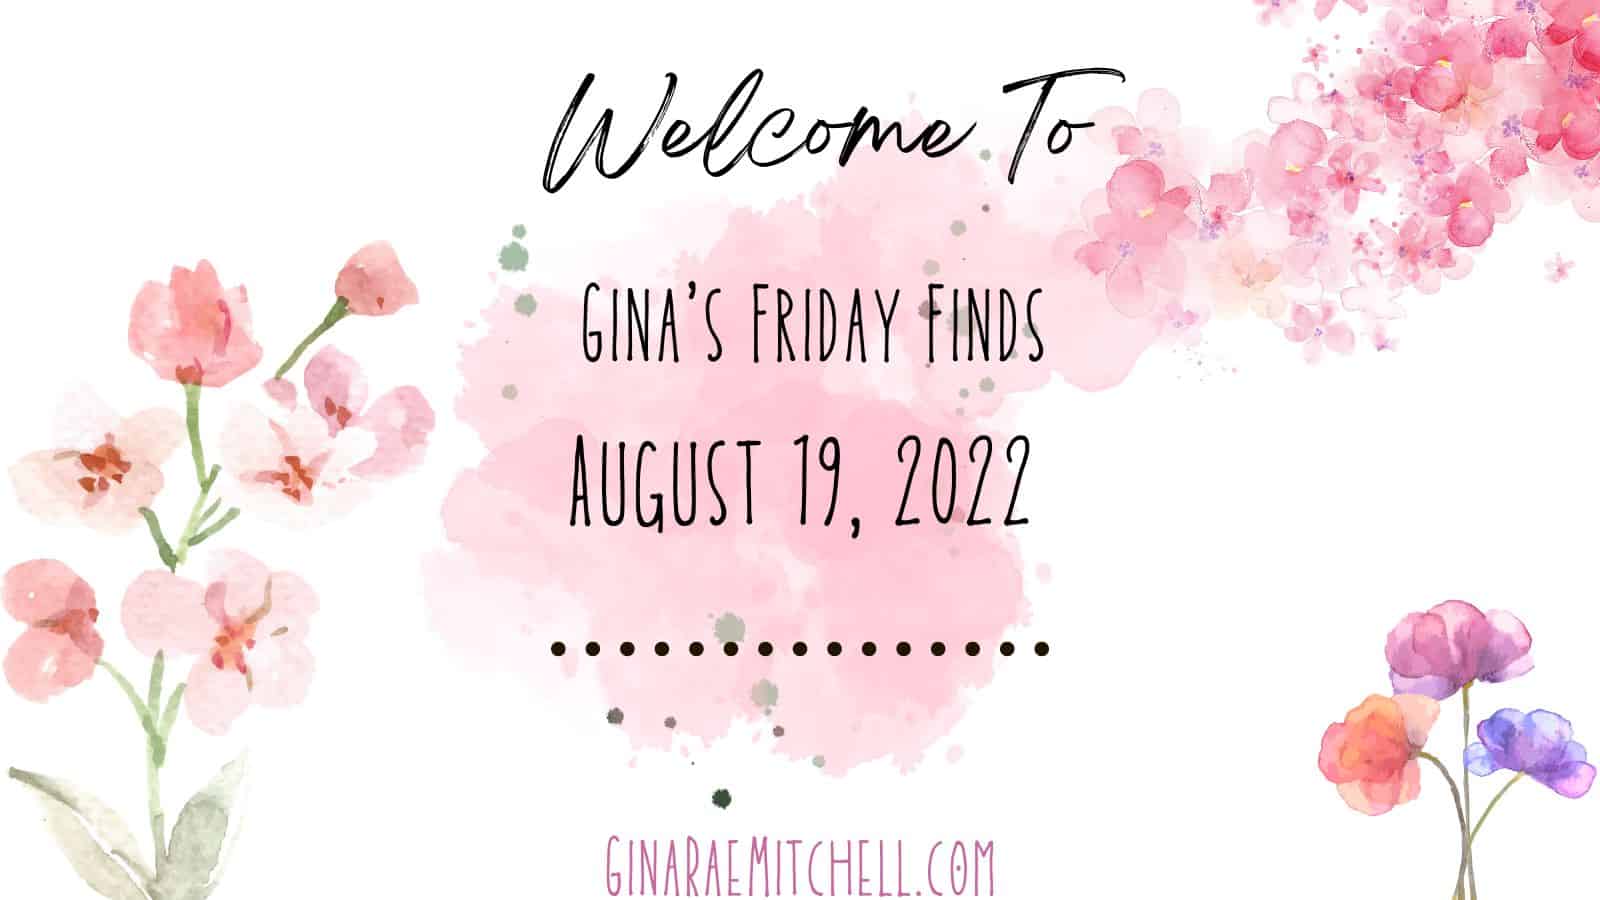 Friday Finds for 19 August 2022 | Indie Author Announcements, Books Recommendations, Delish Recipes, & a Macrame Kit